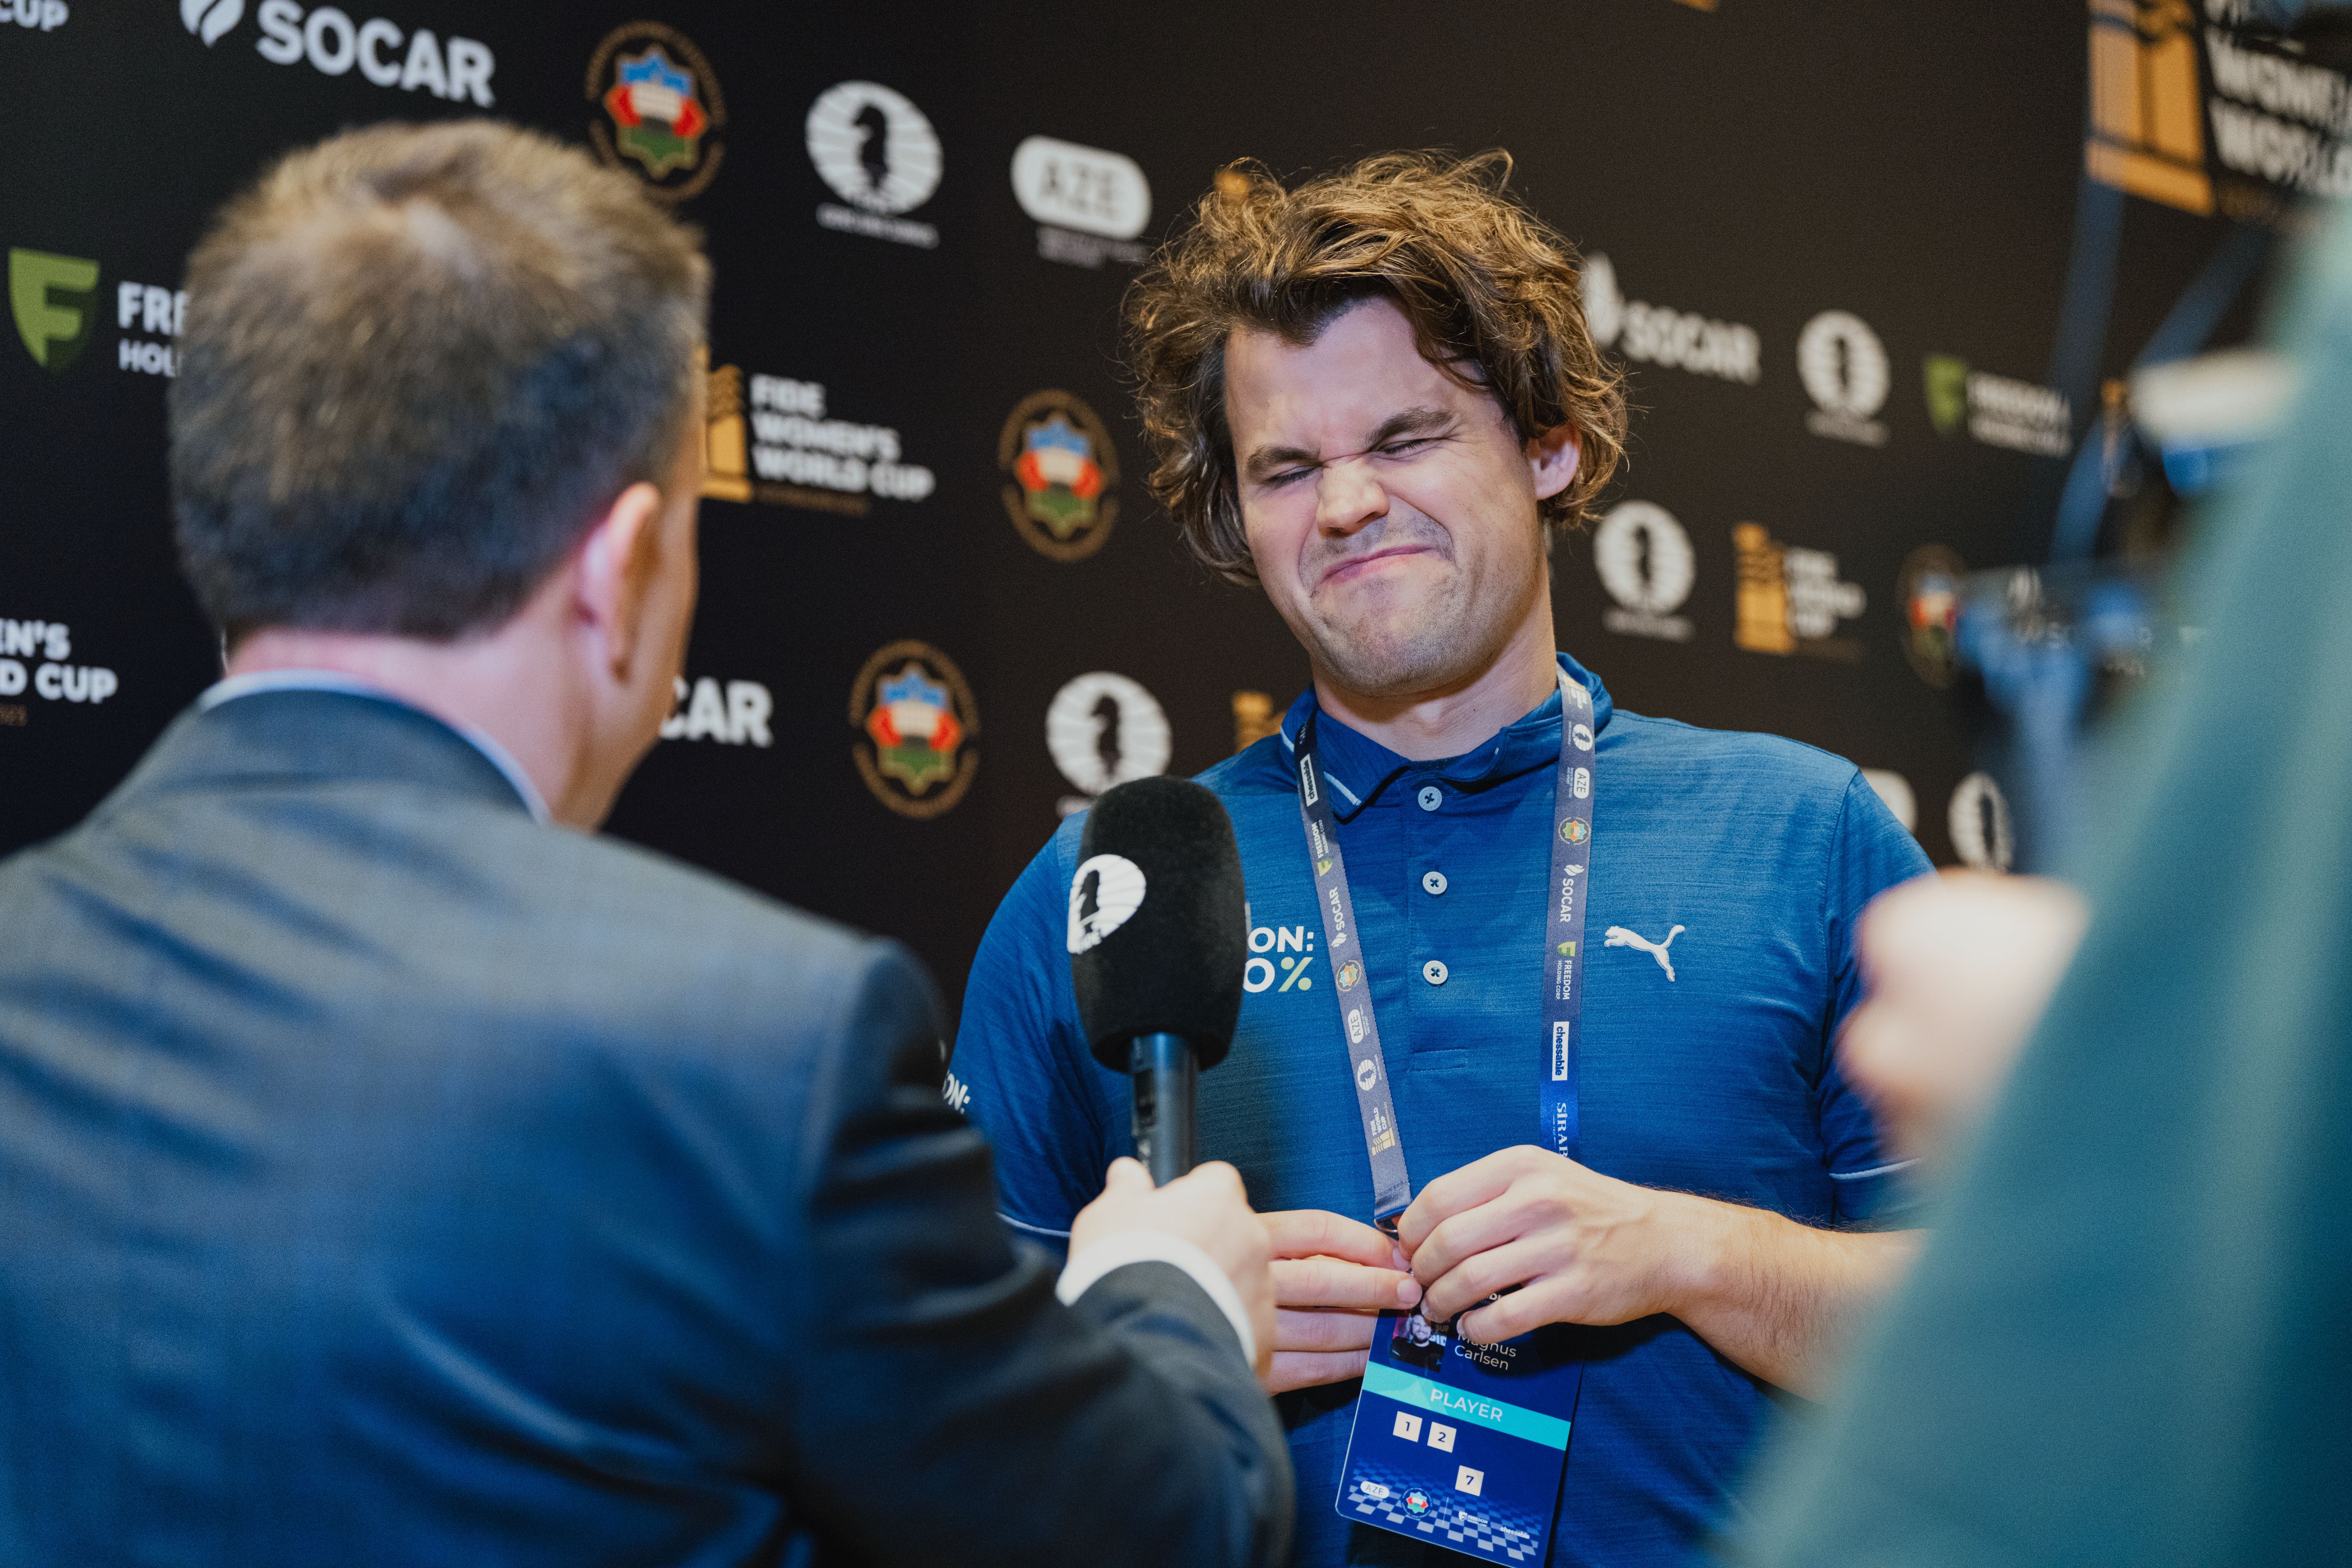 chess24.com on X: I feel amazing! I couldn't even imagine in my wildest  dreams I can come this far, says Nijat Abasov, the first semifinalist at  the #FIDEWorldCup.  / X